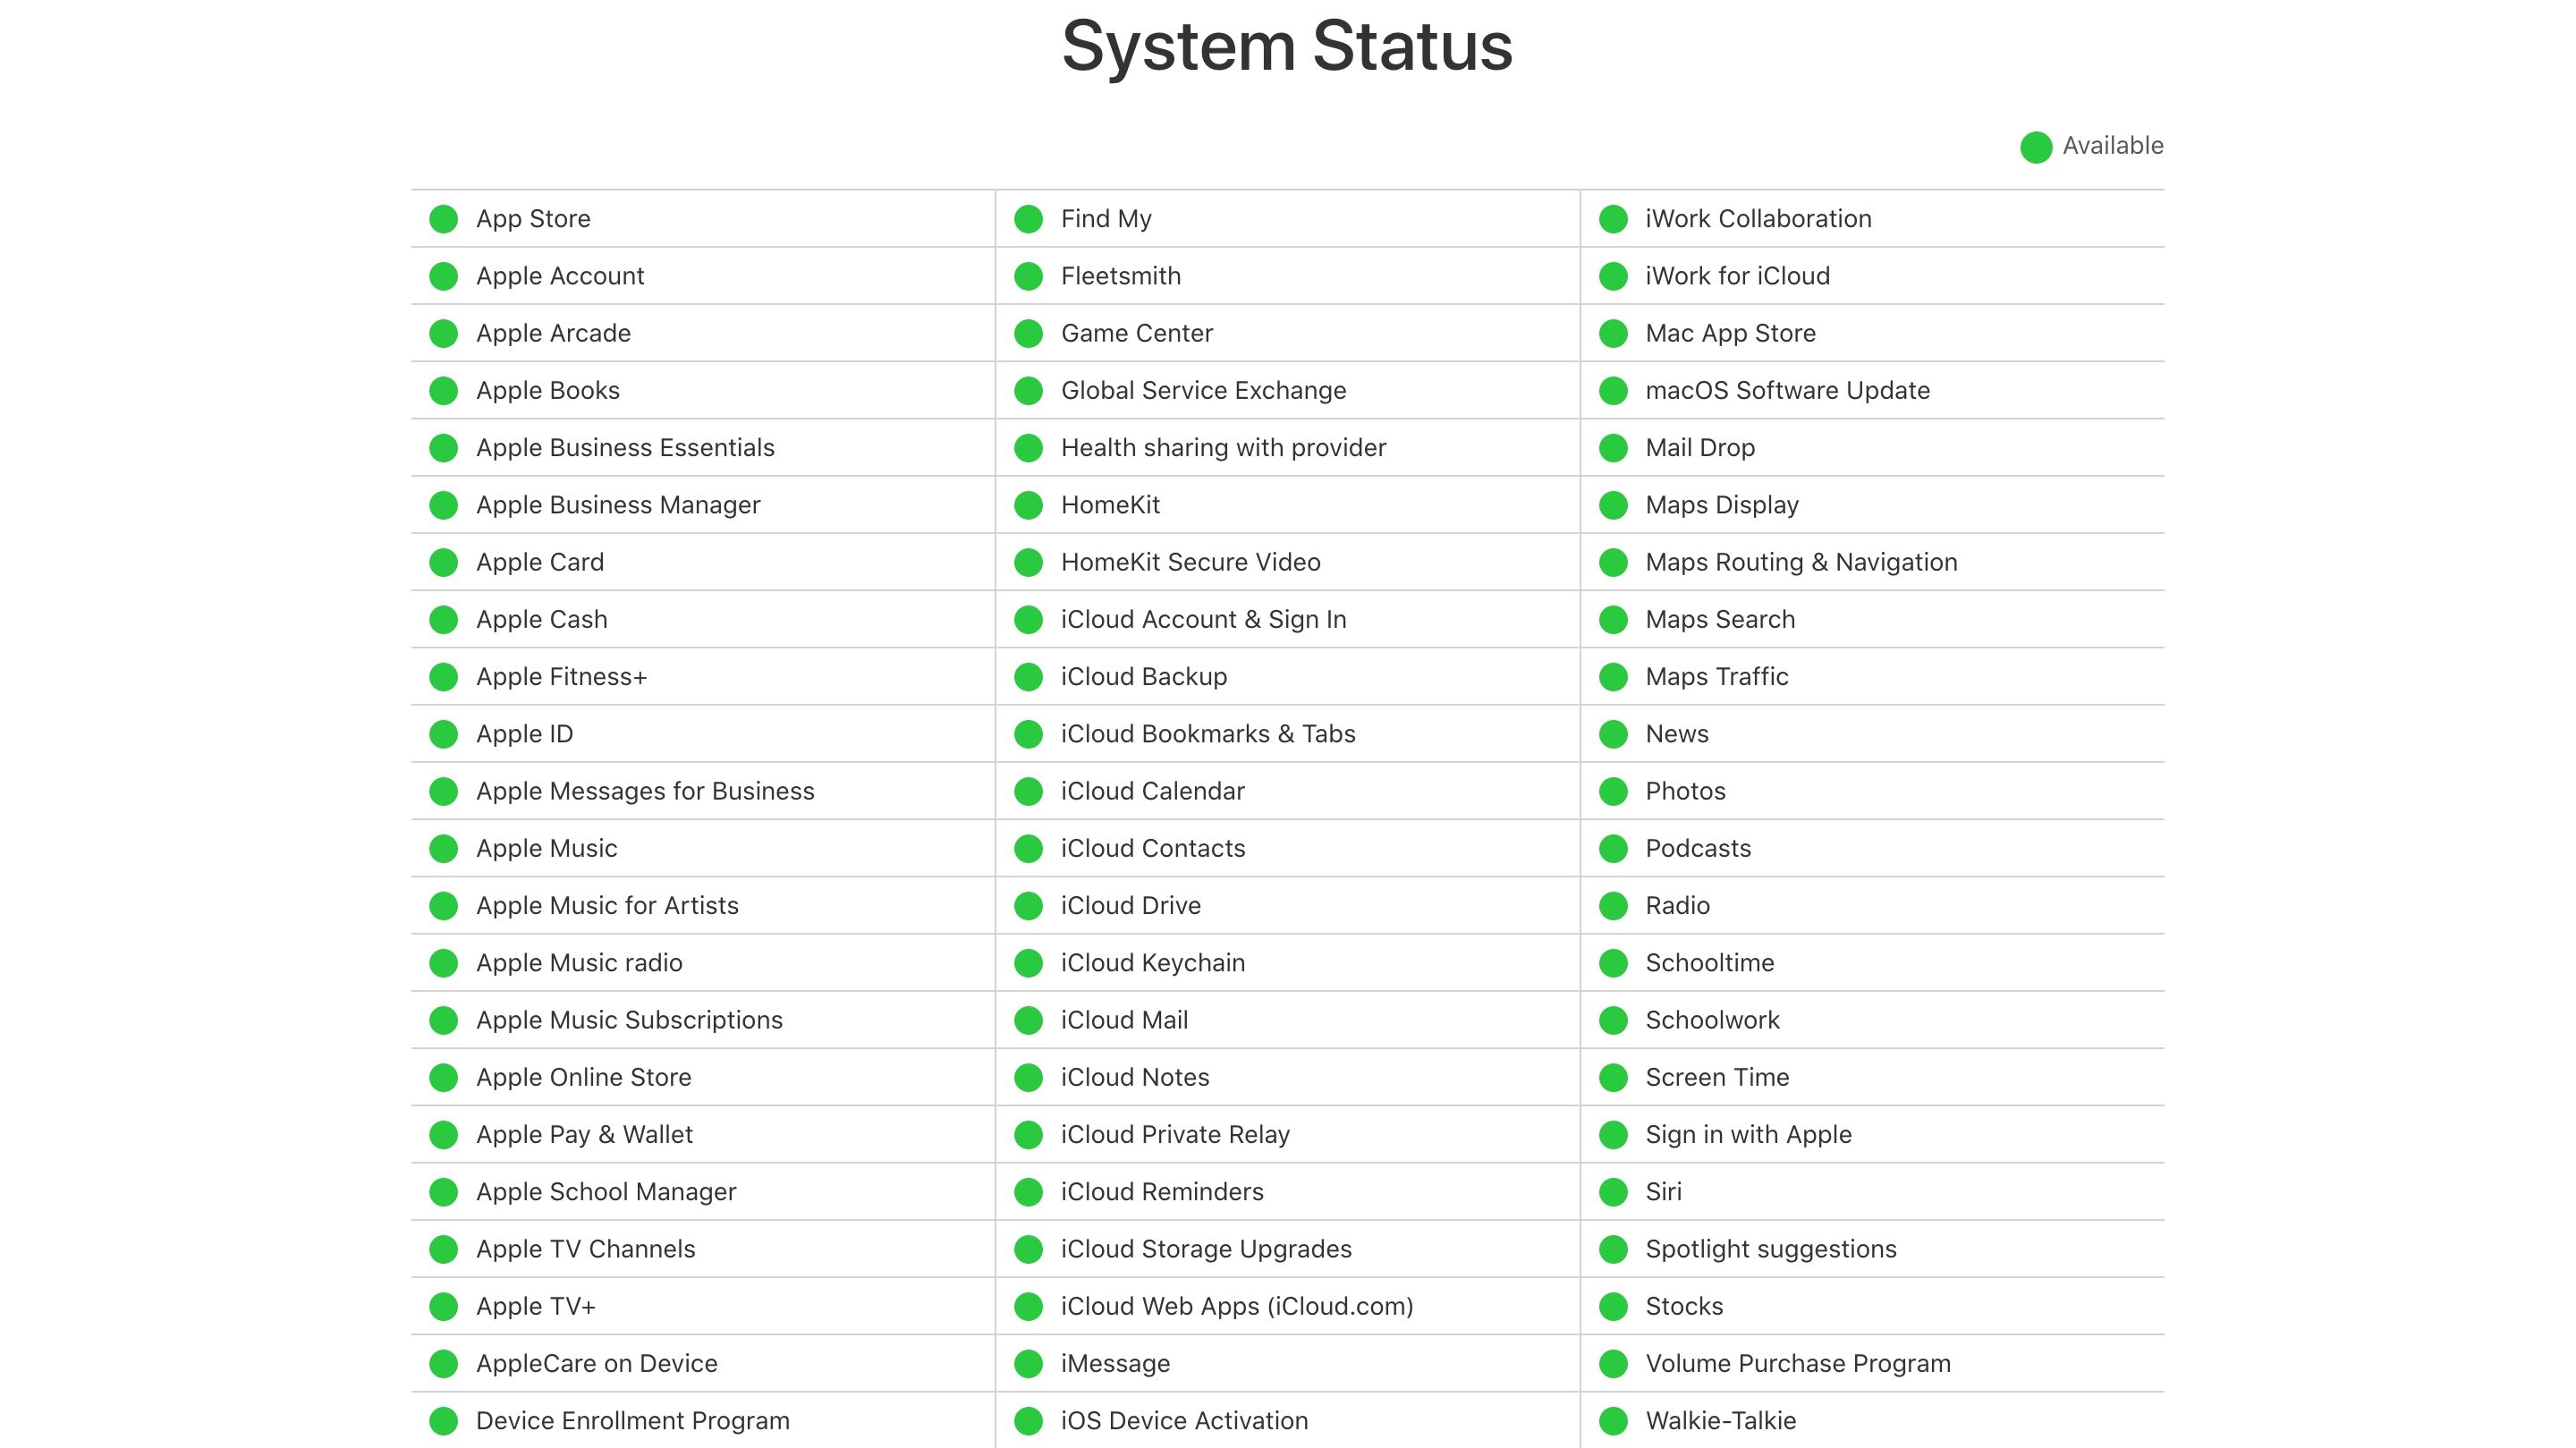 Apple's System status page 